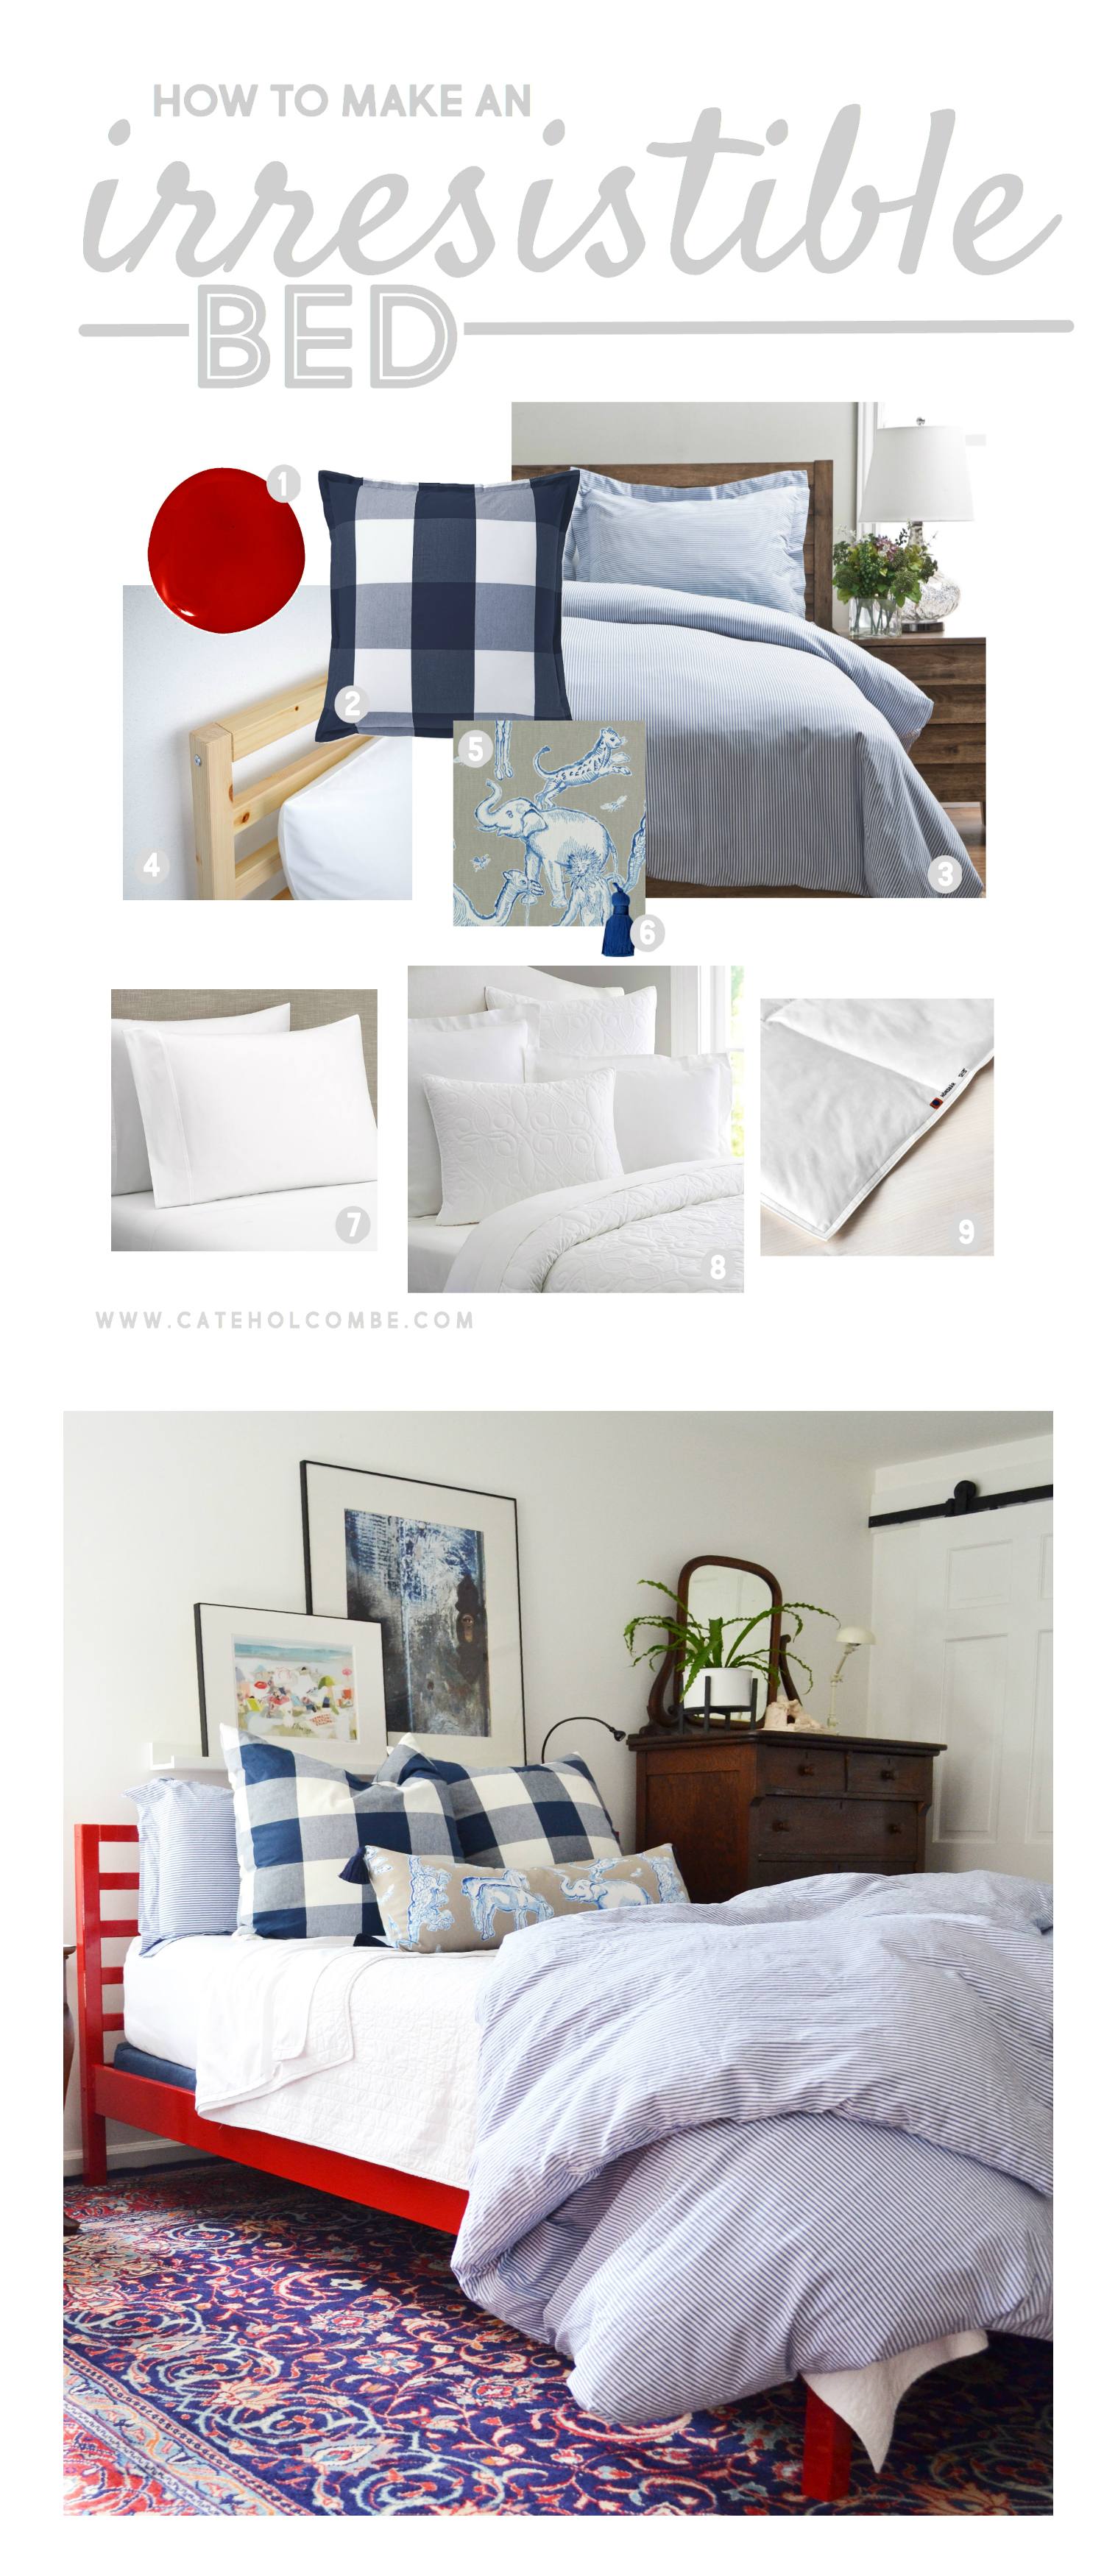 how to make an irresistibly comfortable bed pin Cate Holcombe